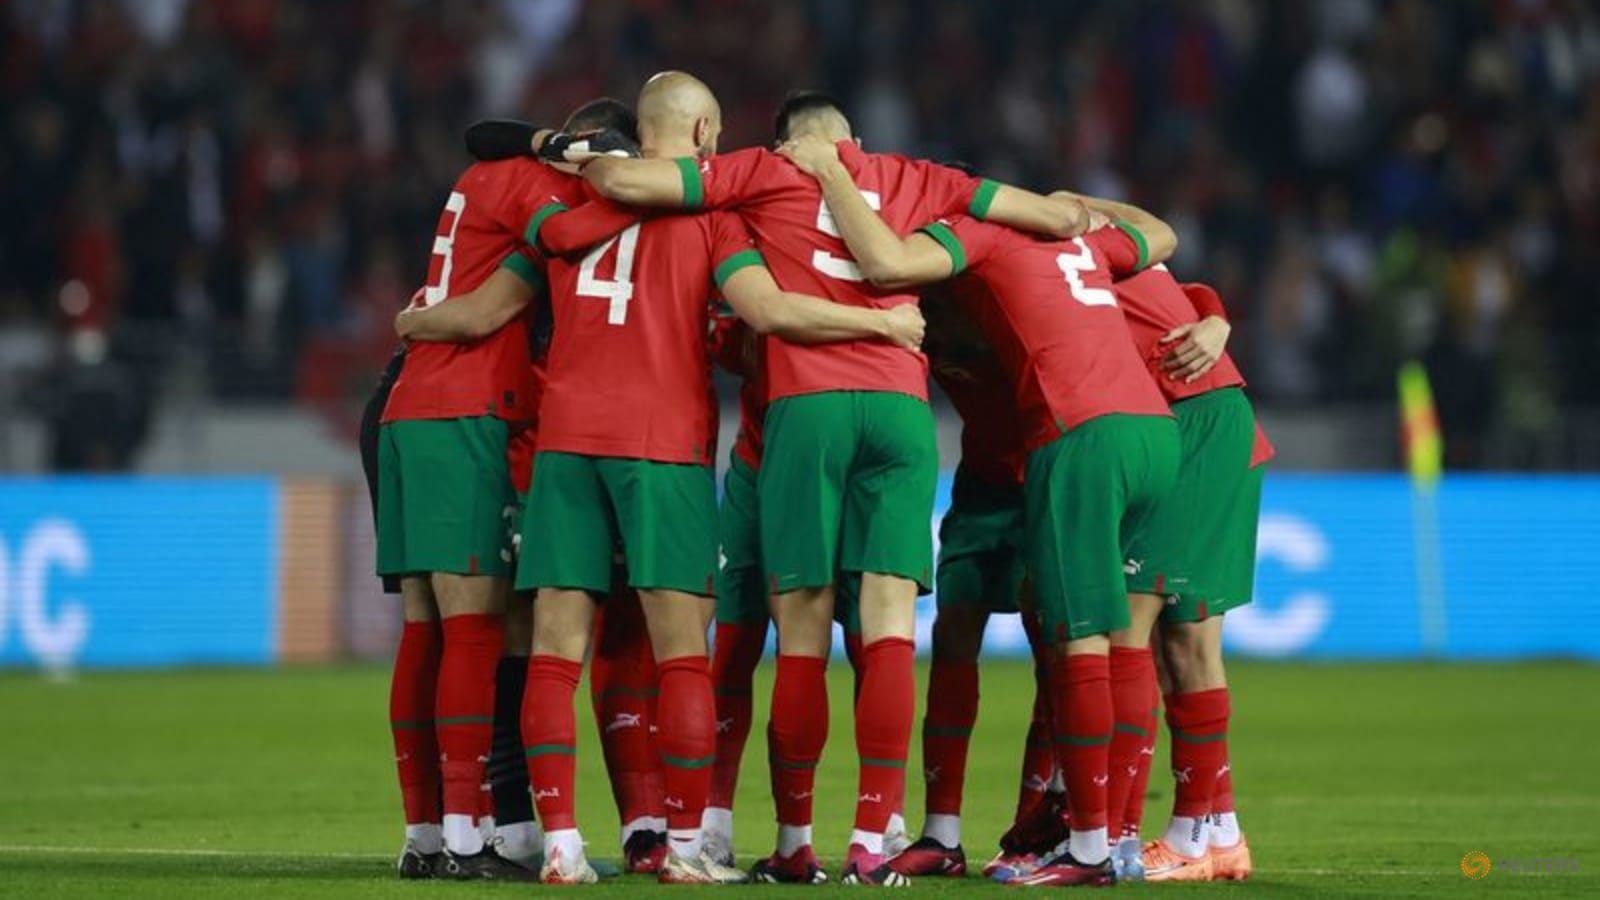 Spain hotel worker arrested for alleged hate crime against Morocco players